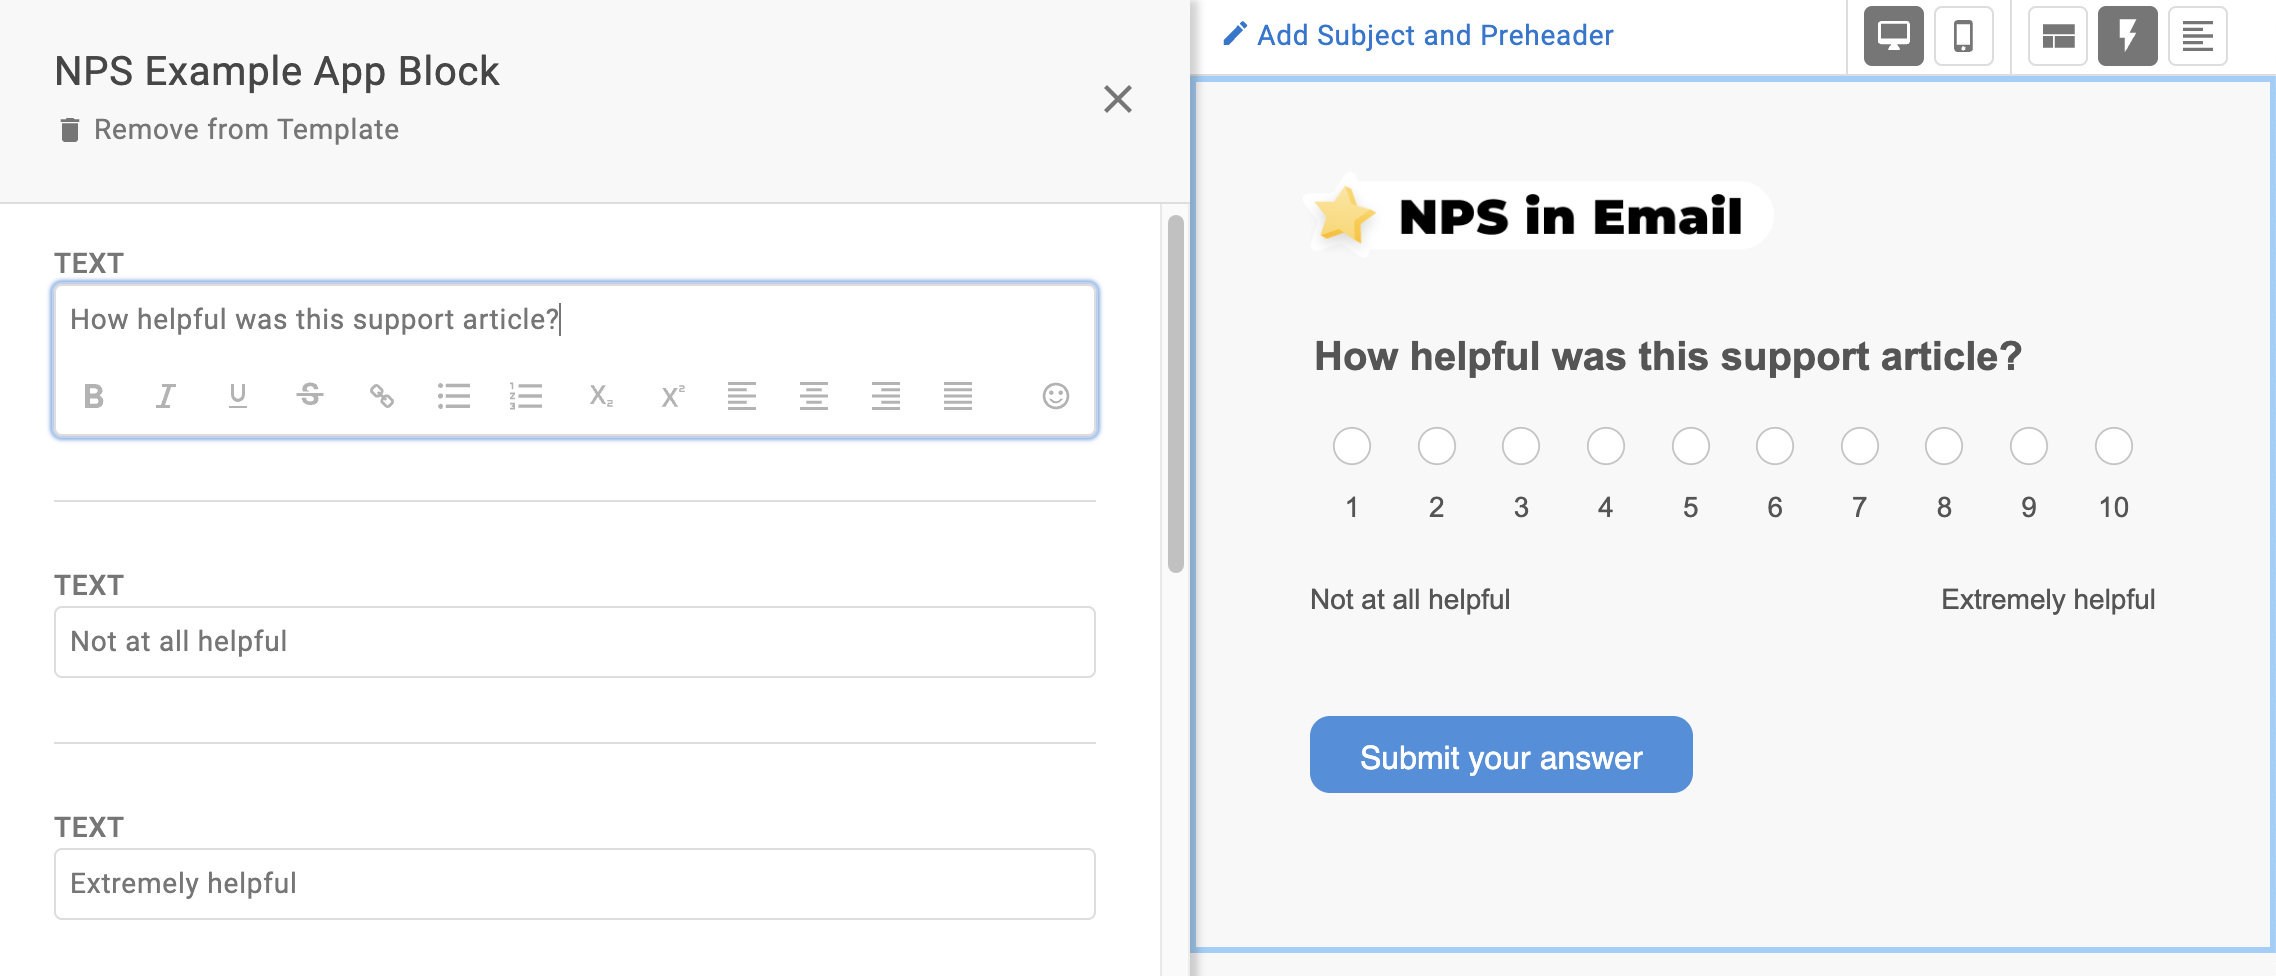 Editing an NPS in Email survey within a template